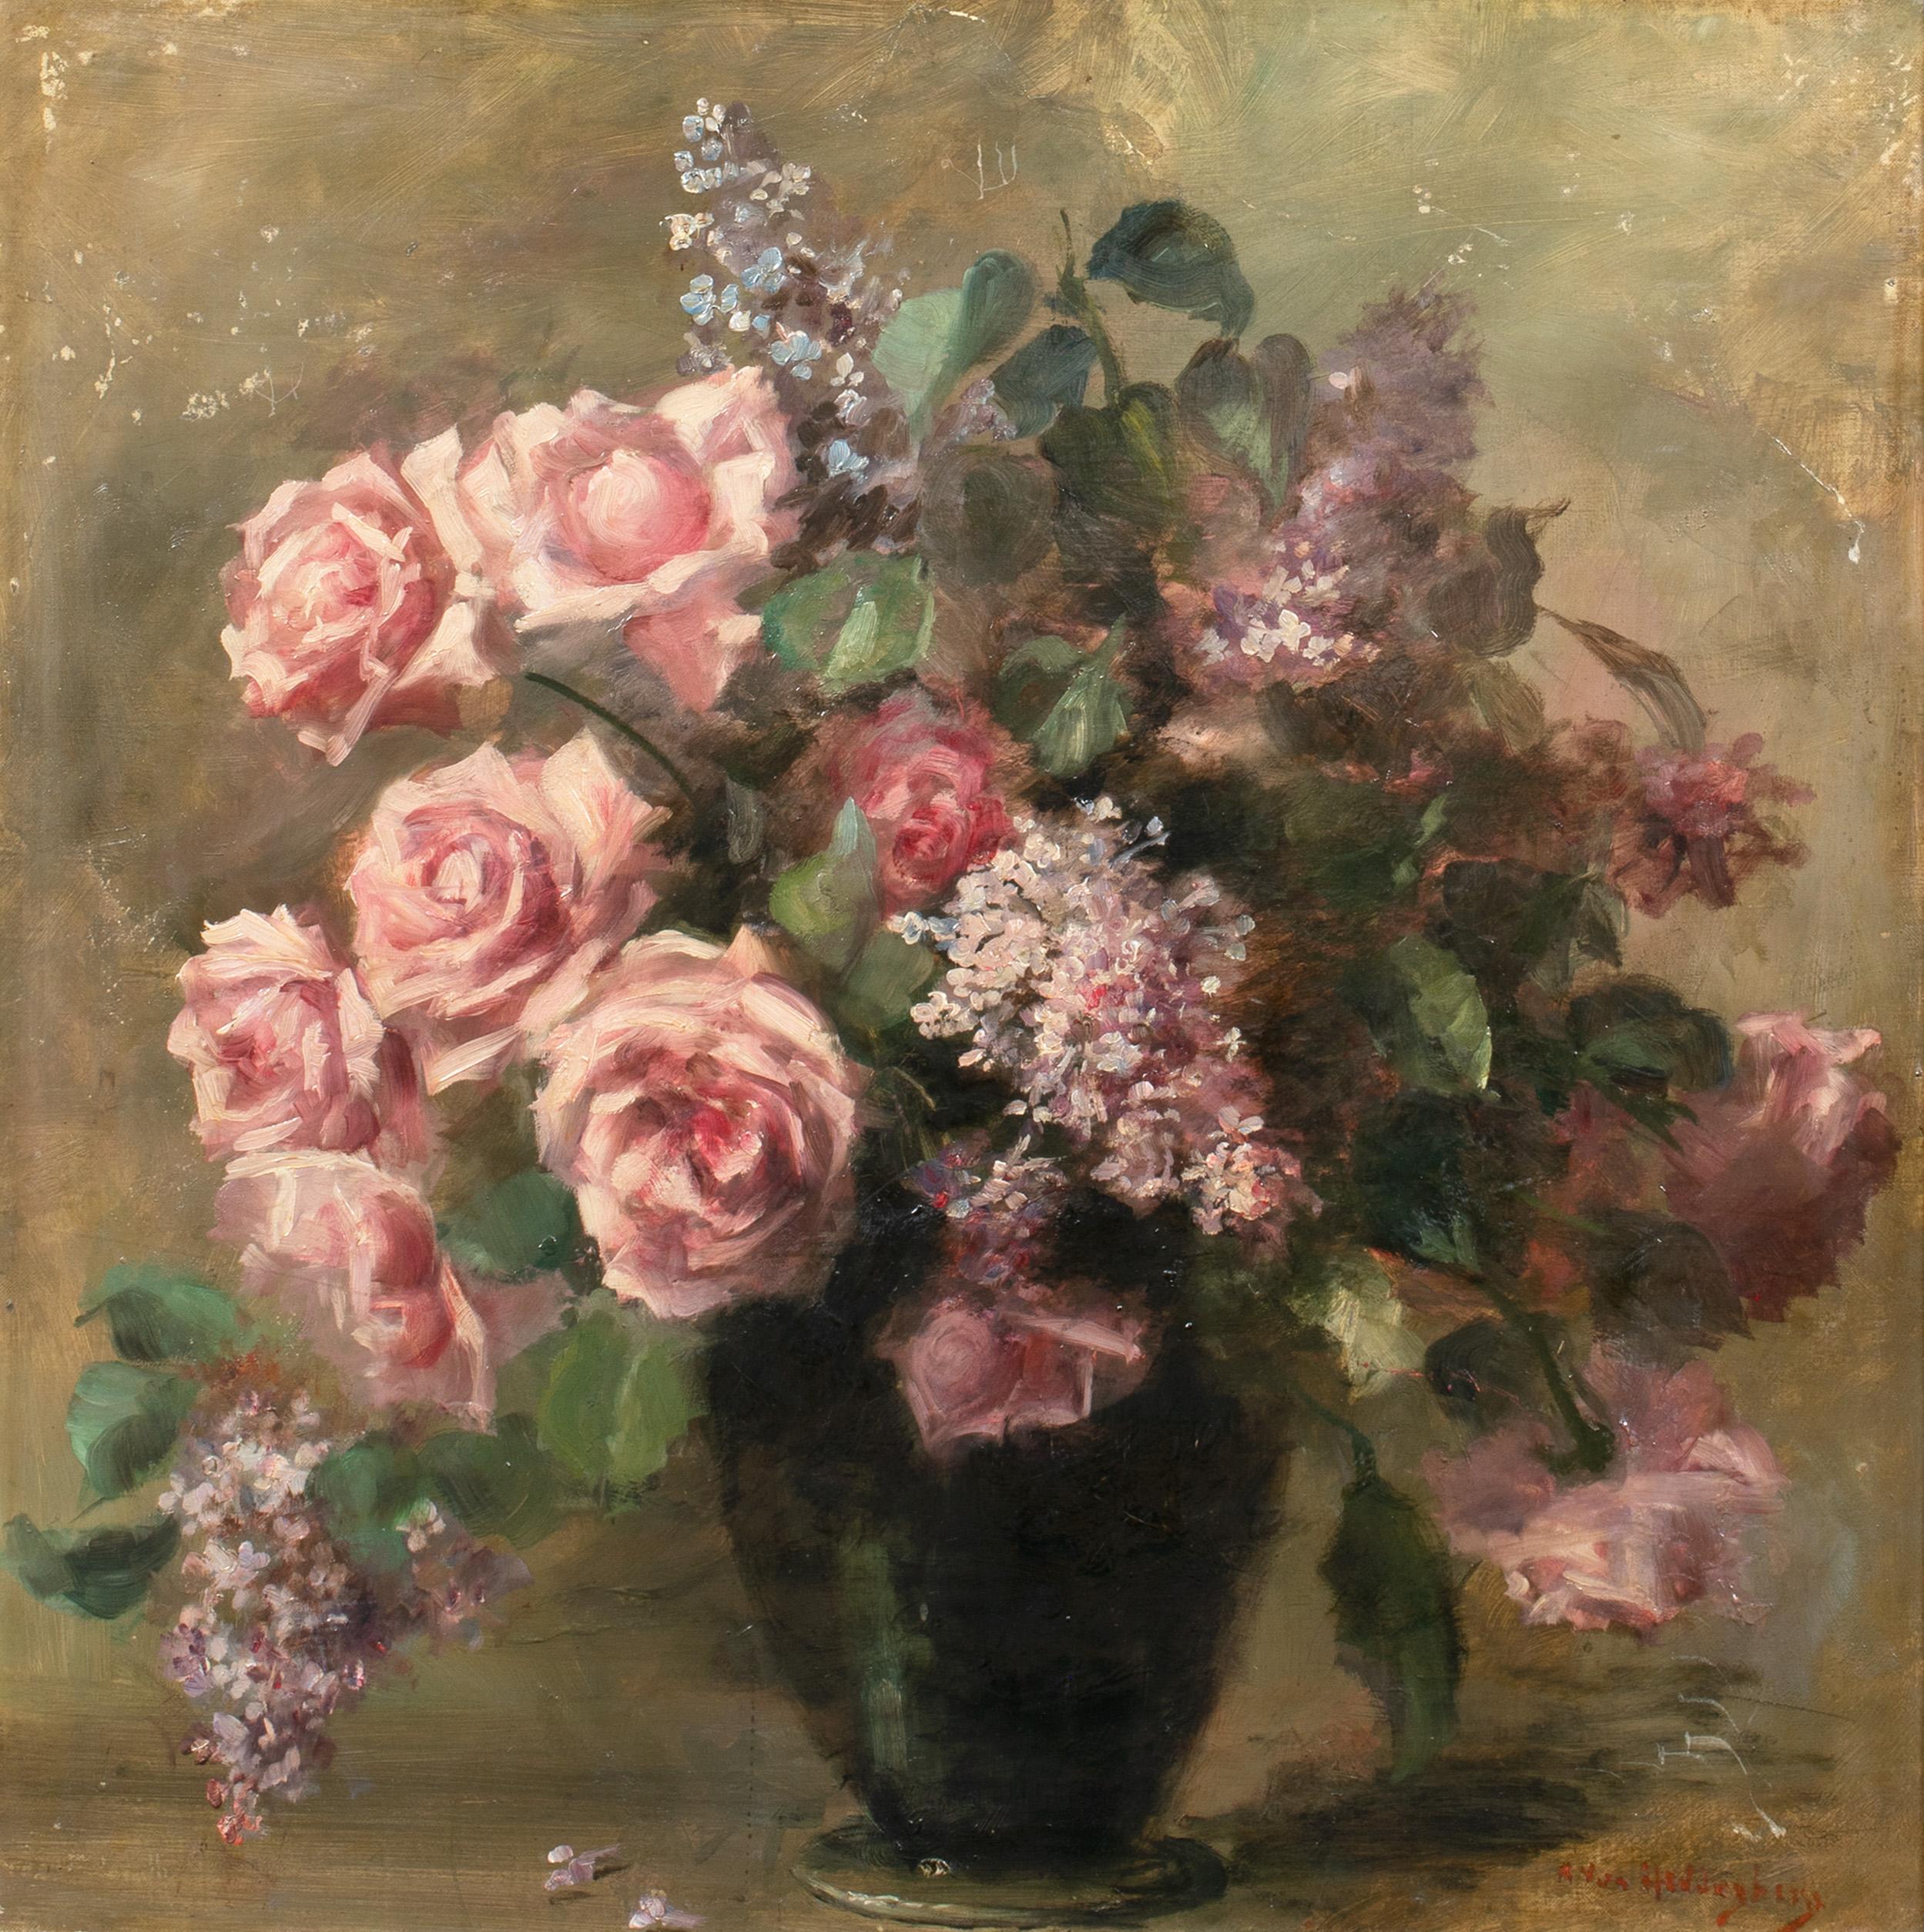 Unknown Landscape Painting - Study Of Pink Roses, 19th Century 